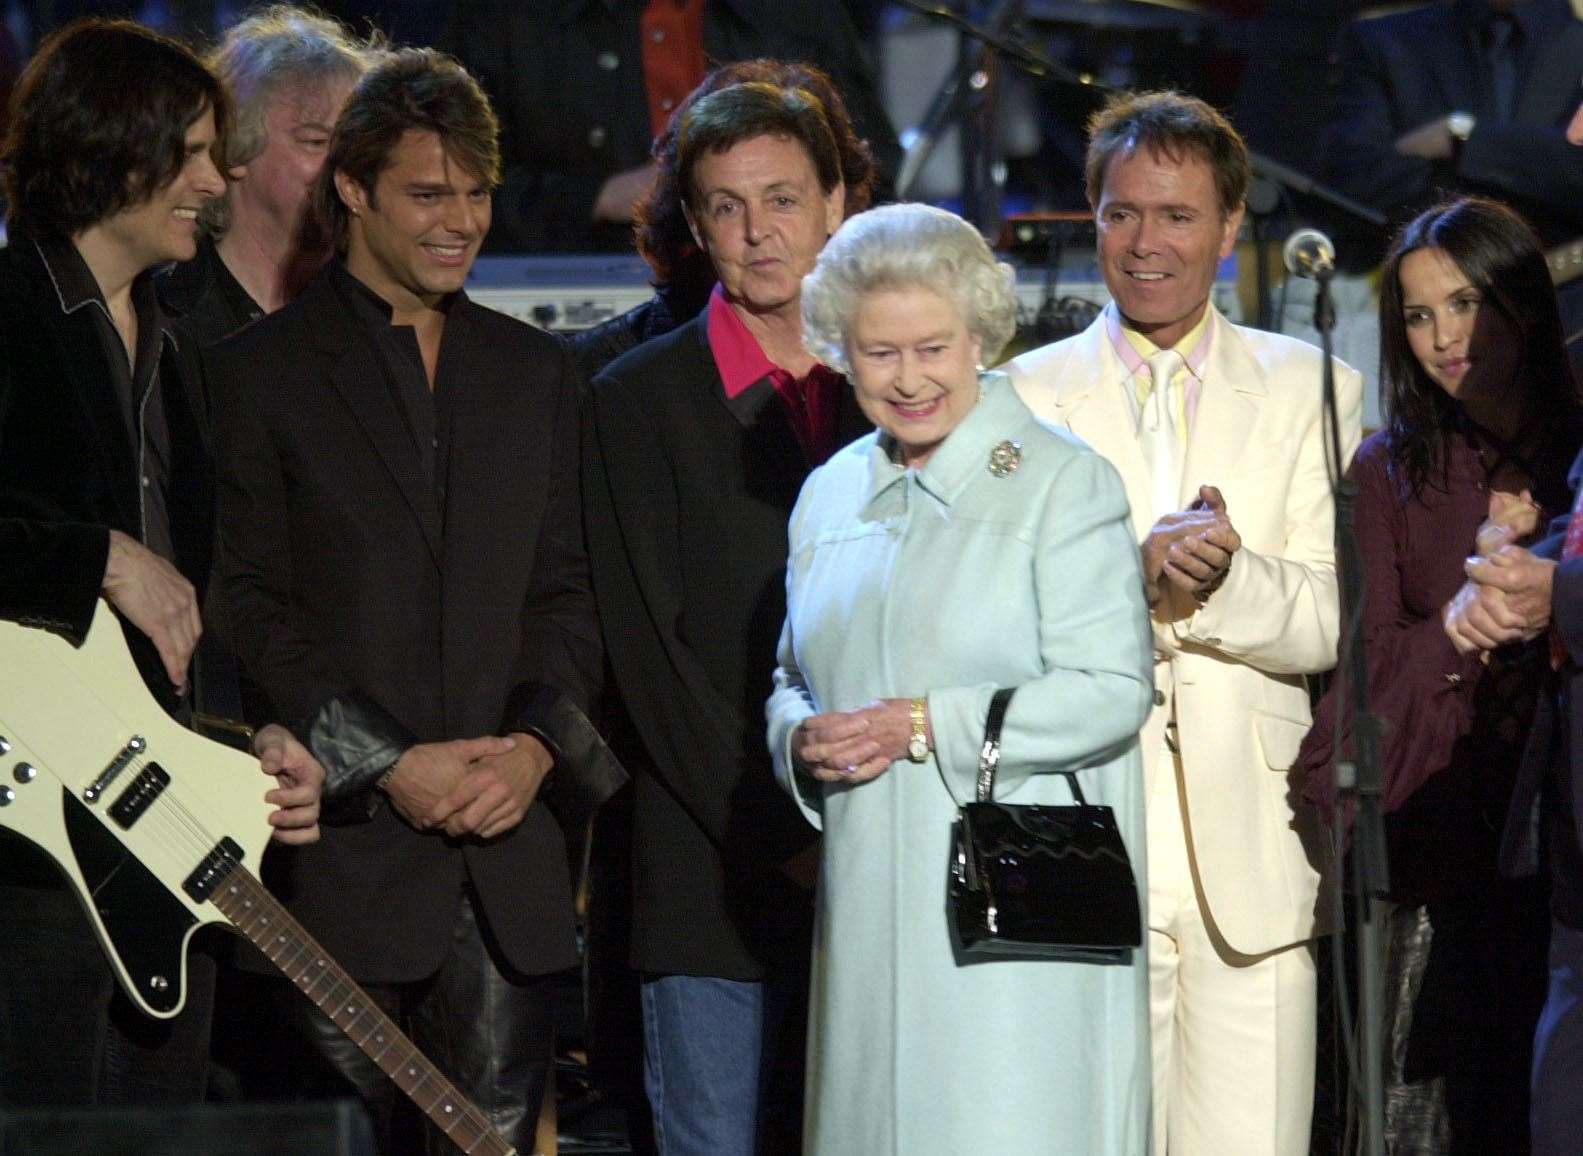 Sir Paul recalled how he had been given the opportunity to ‘rock out’ in the Queen’s garden to celebrate her Golden Jubilee in 2002 (PA)